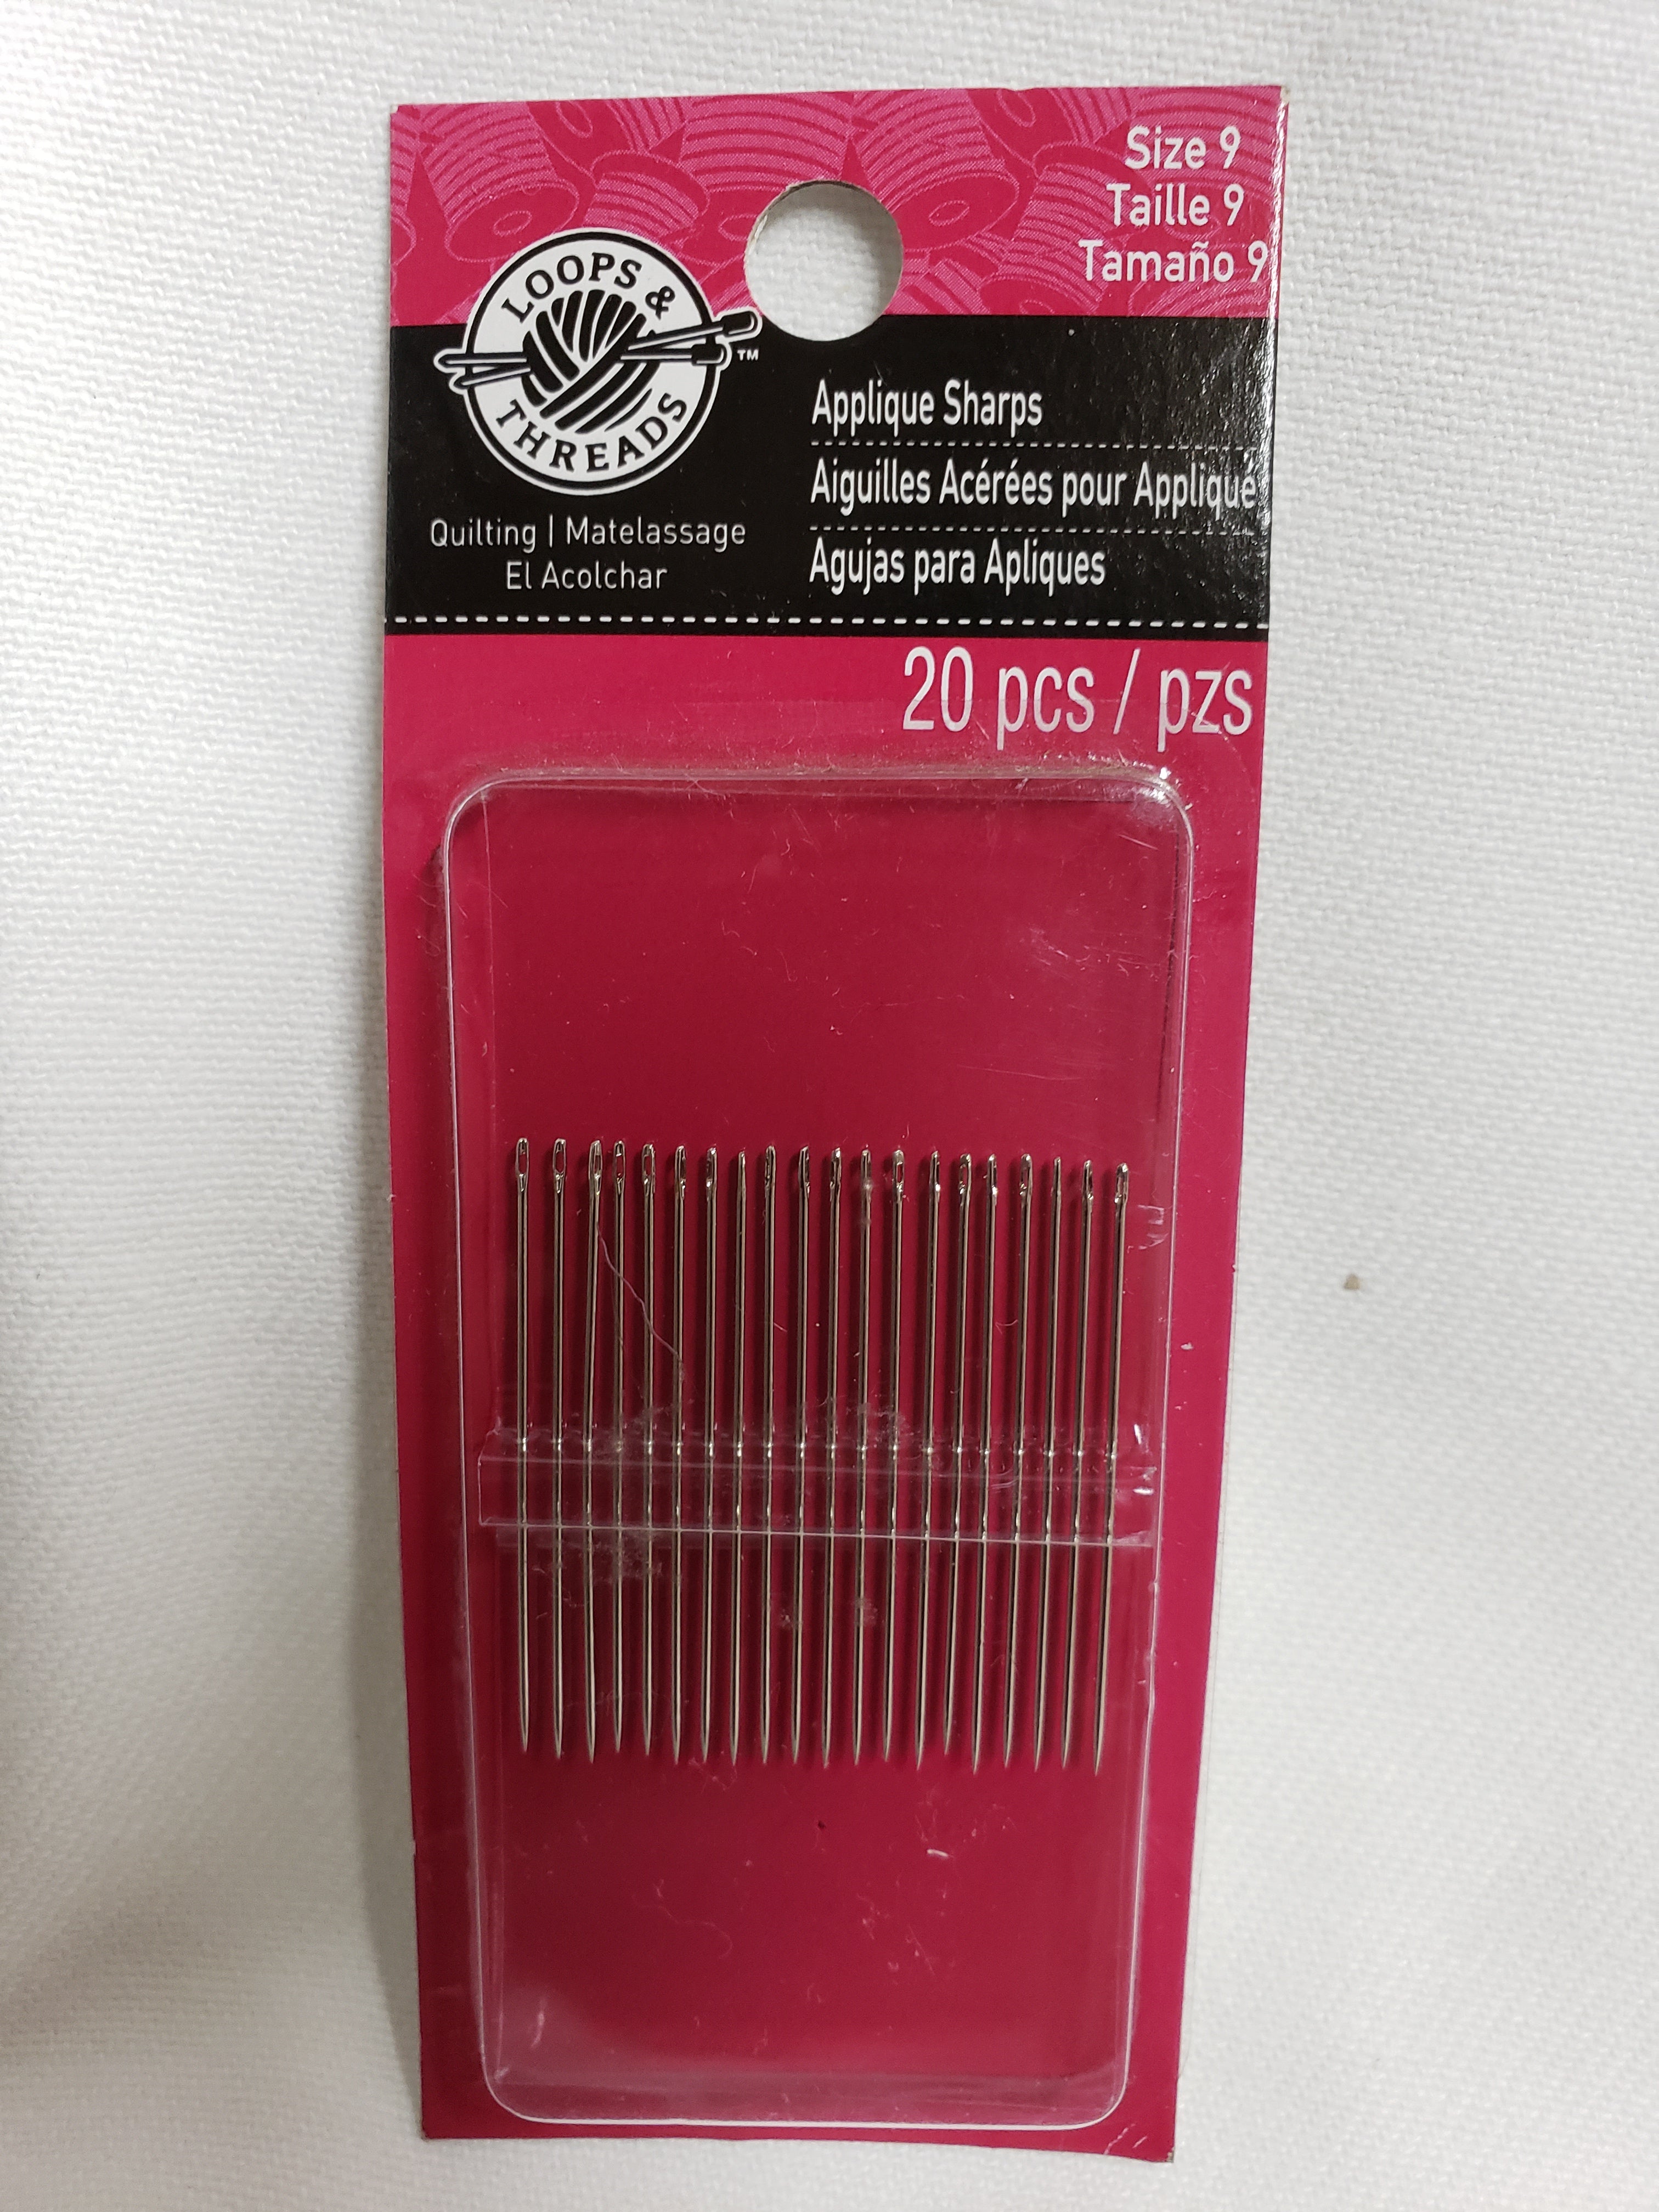 Dritz Embroidery Hand Needles Size 7 - 16ct - Hand Needles - Pins & Needles  - Notions